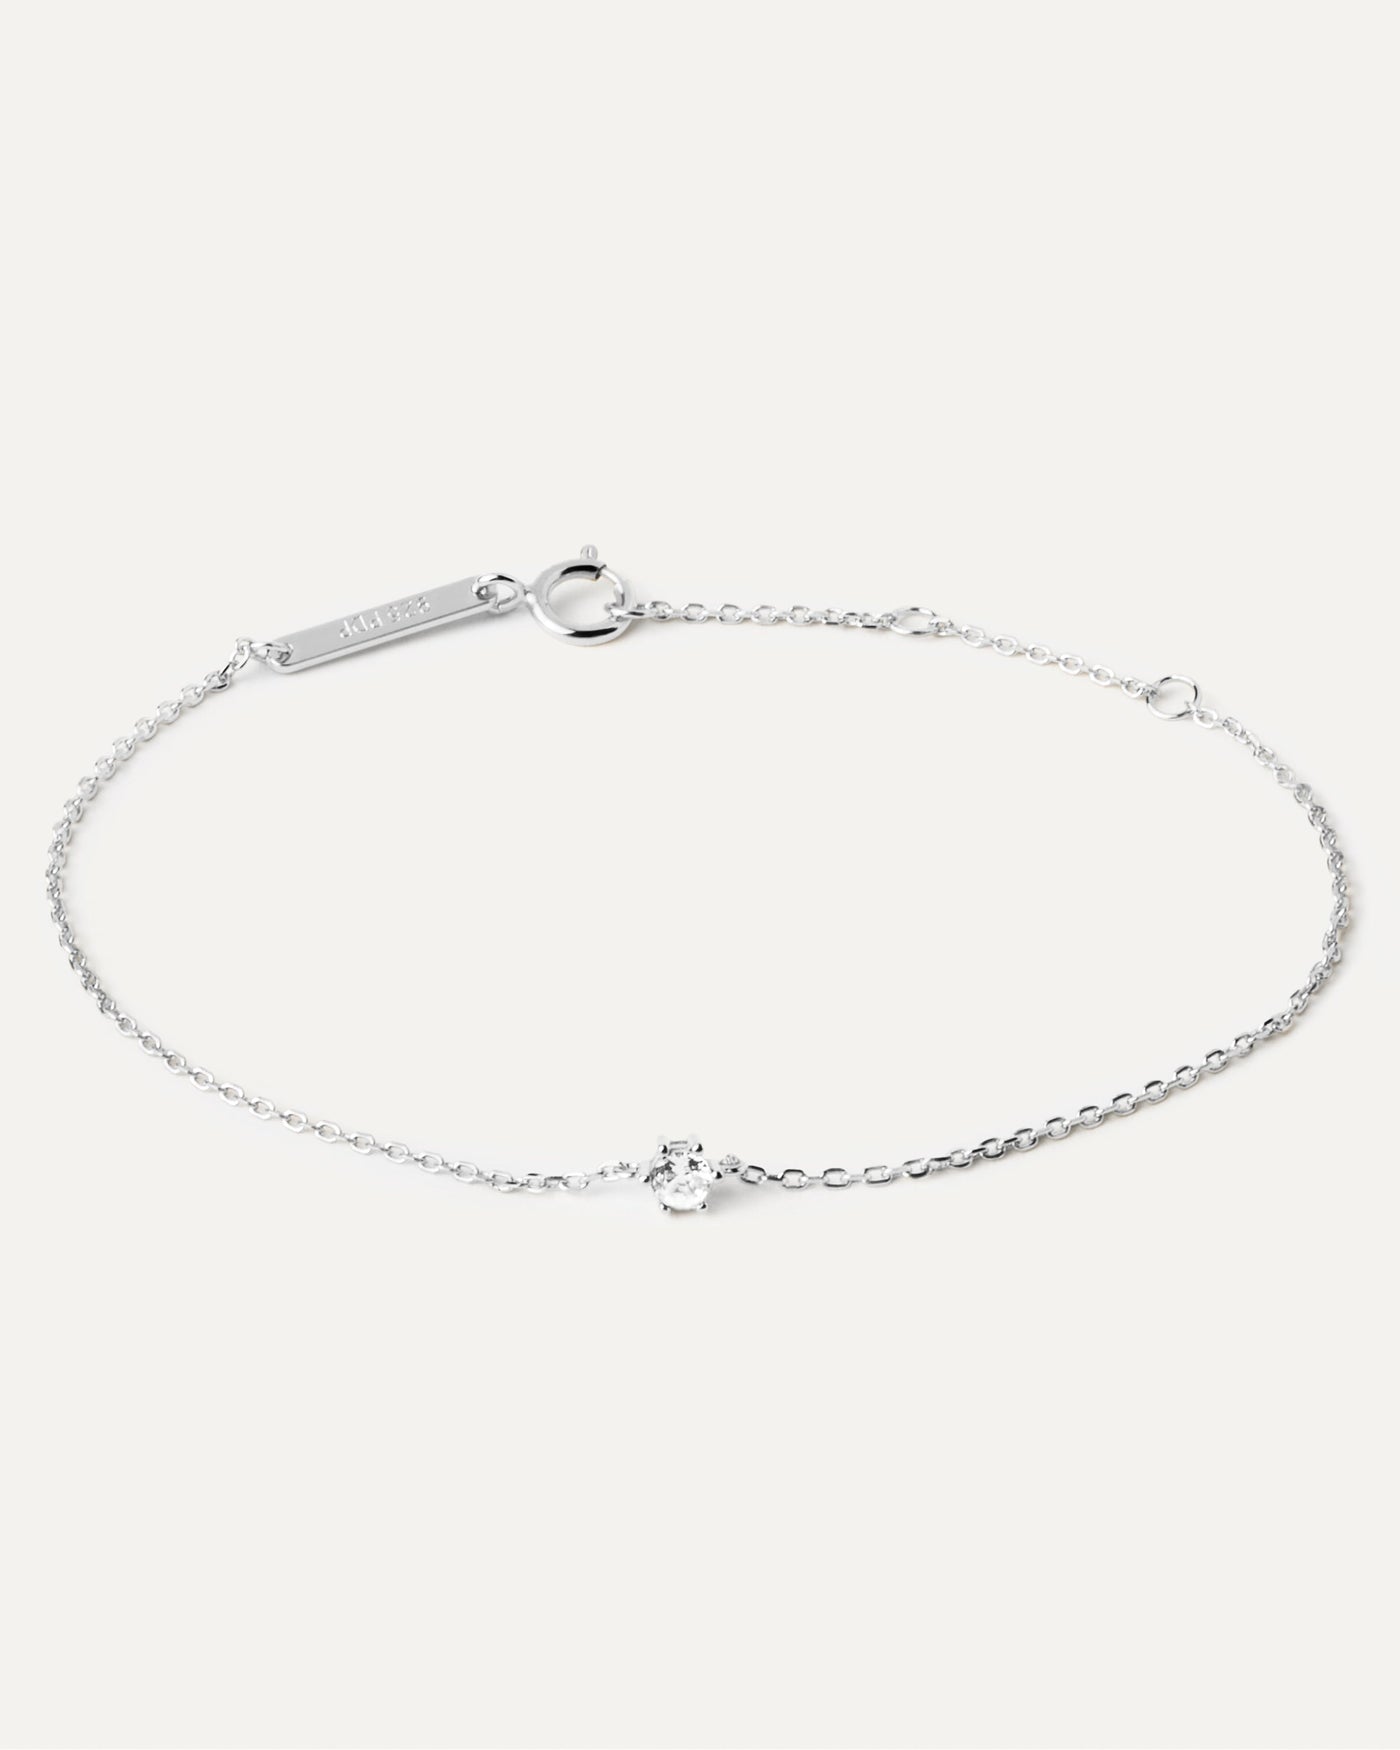 2023 Selection | White Solitary Bracelet Silver. Thin chain bracelet in 925 sterling silver and a white zirconia. Get the latest arrival from PDPAOLA. Place your order safely and get this Best Seller. Free Shipping.